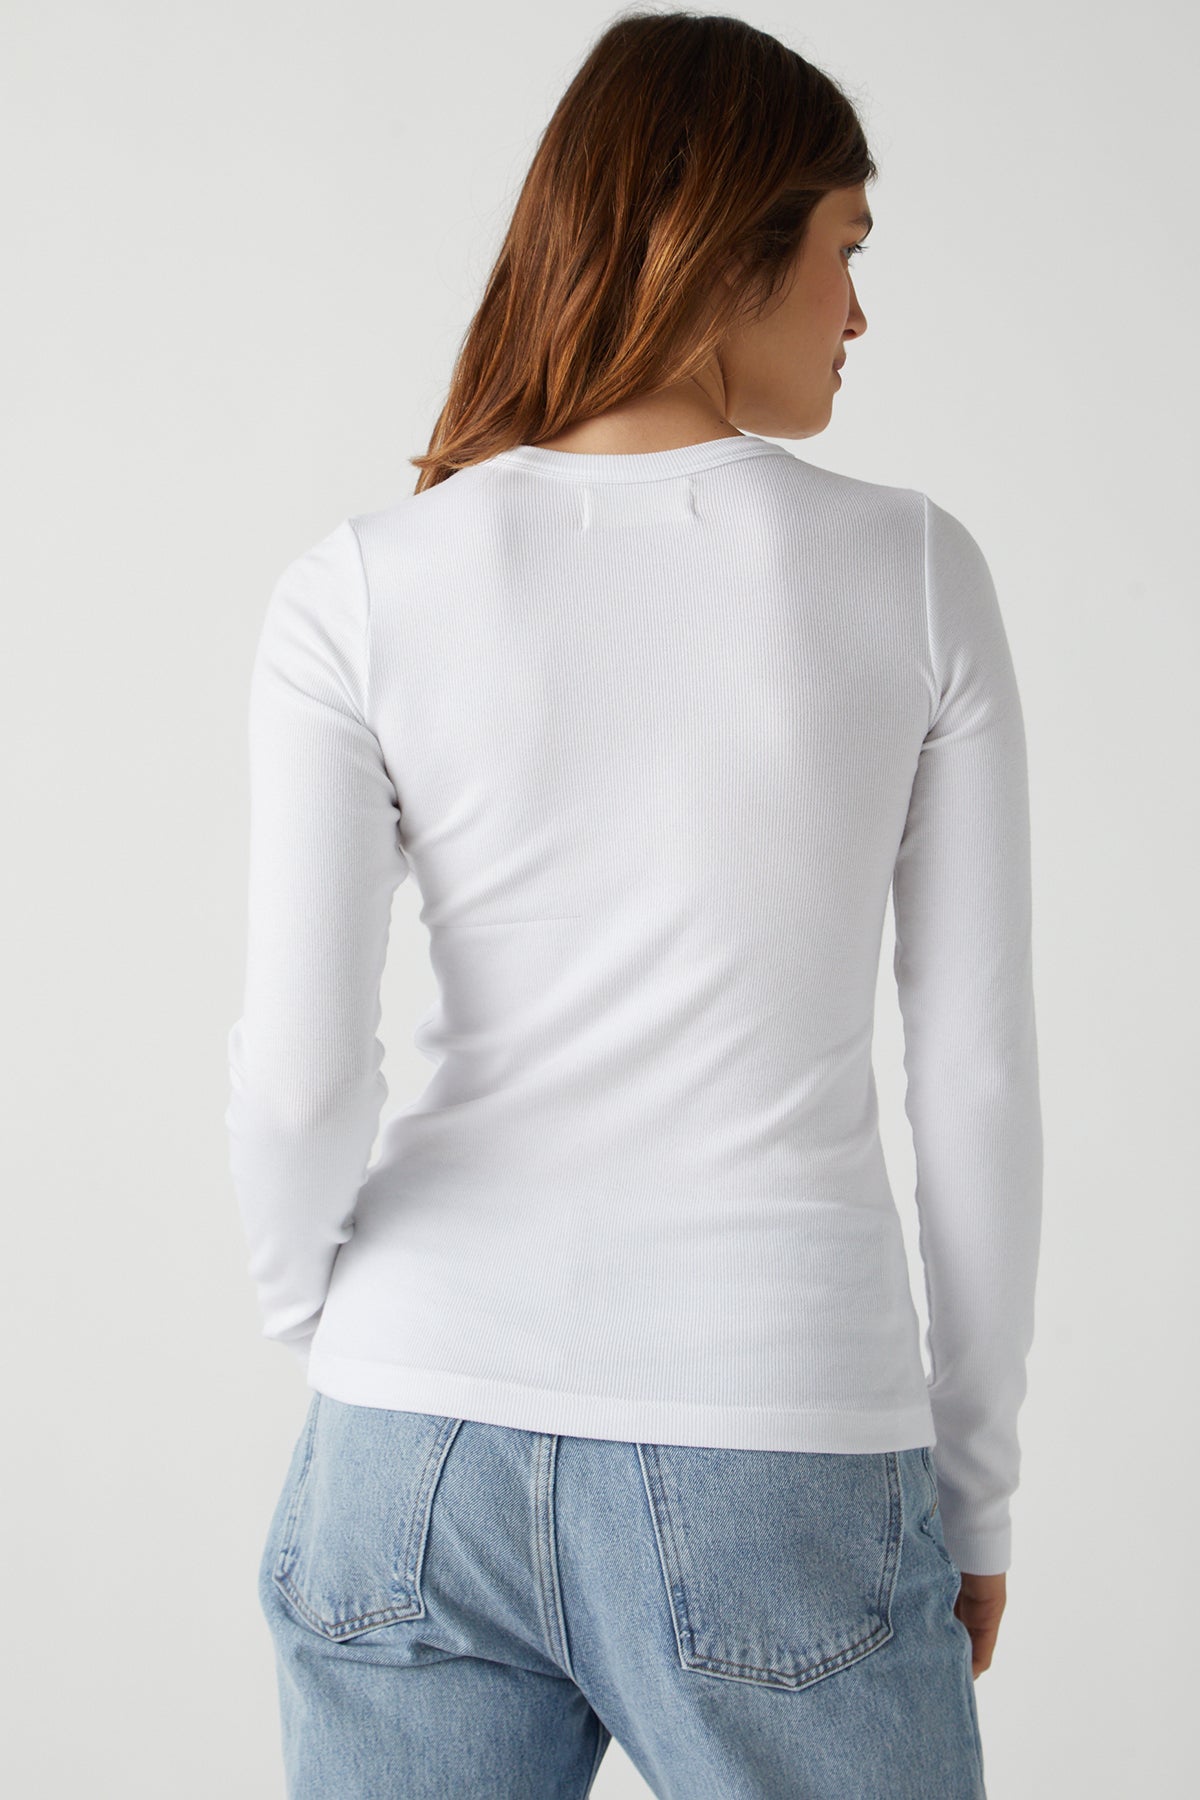   Camino Tee in white with blue denim back 